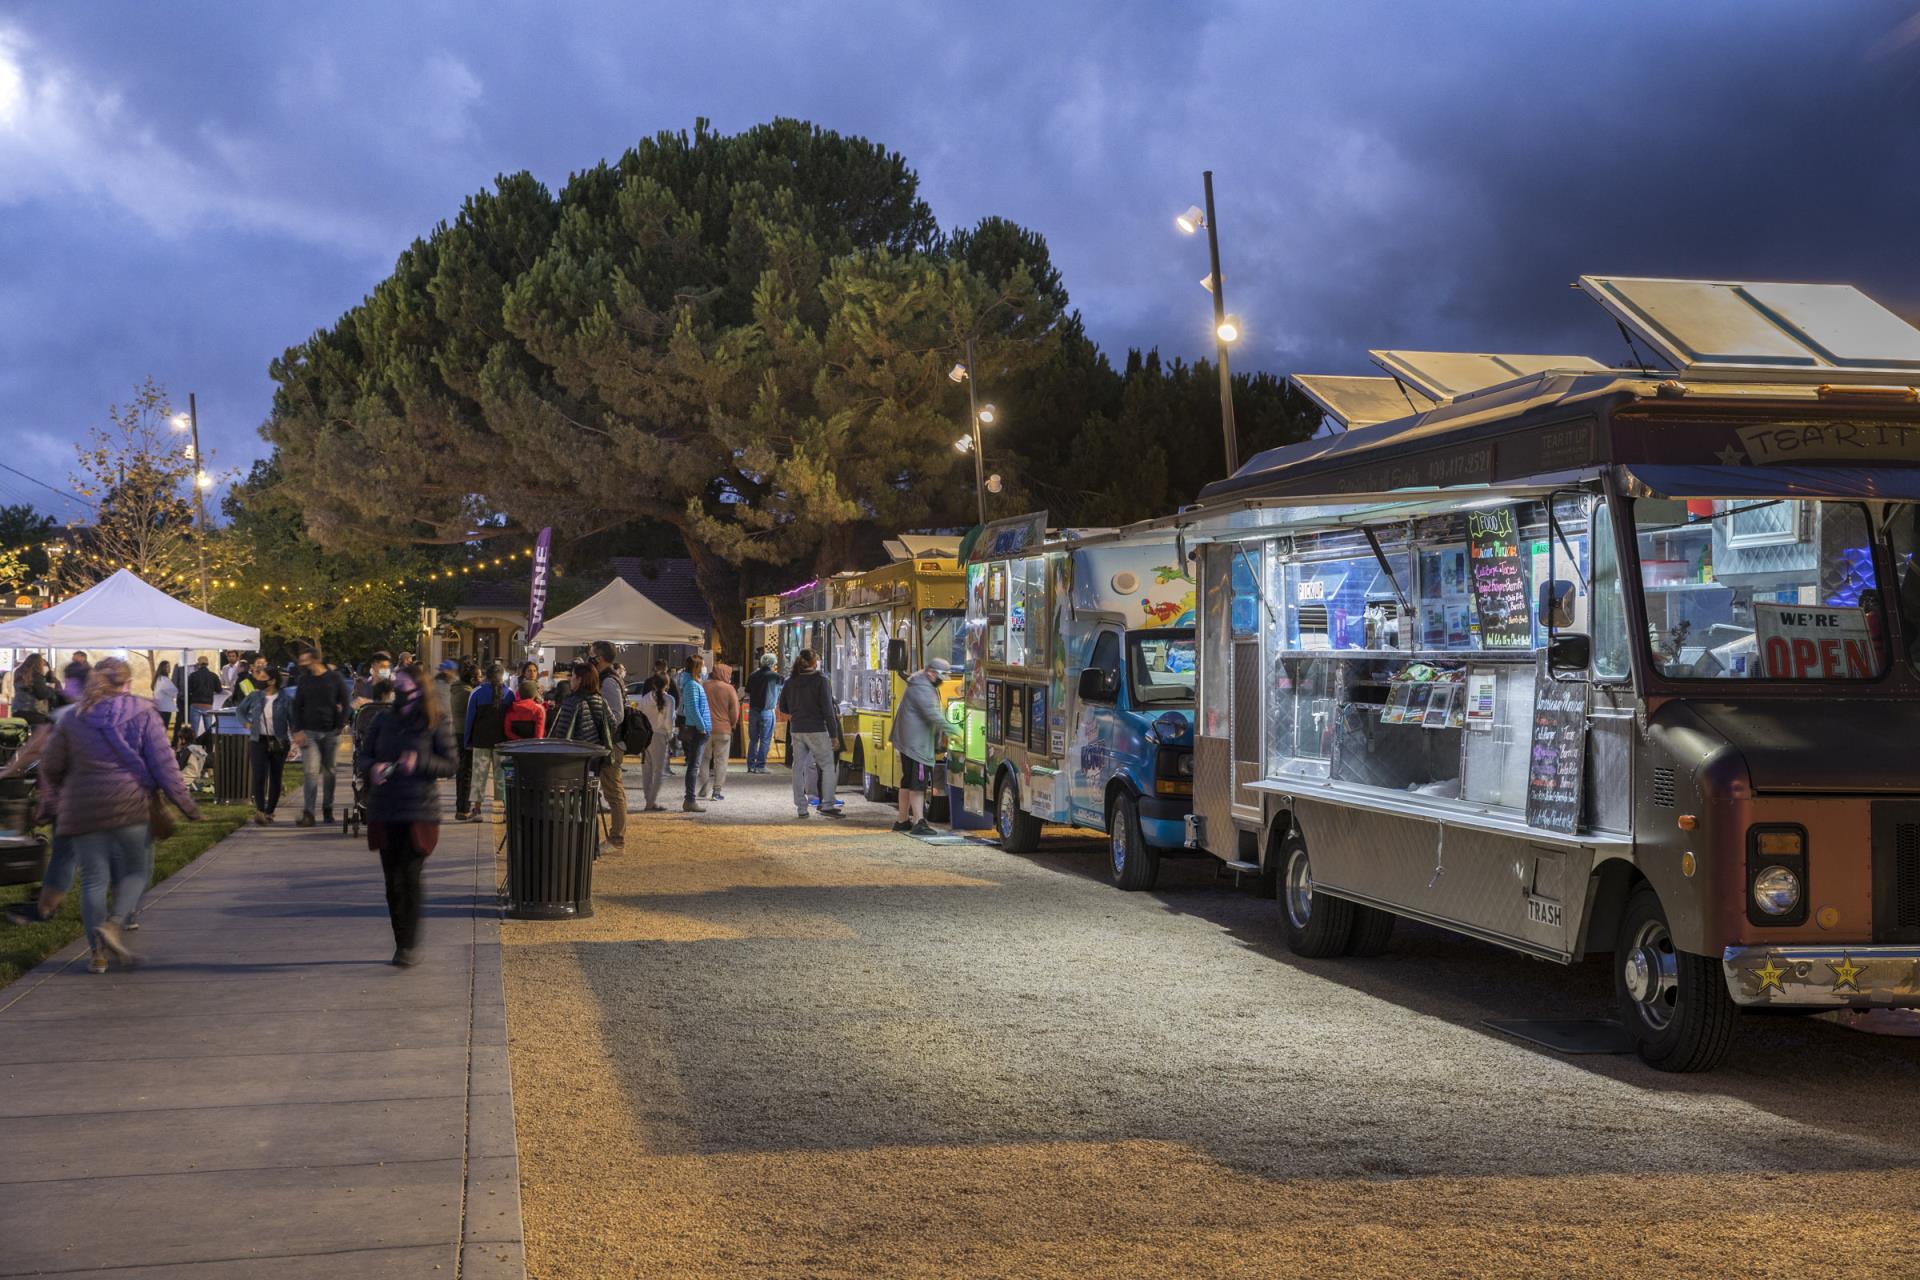 Food Trucks and people gathered at dusk